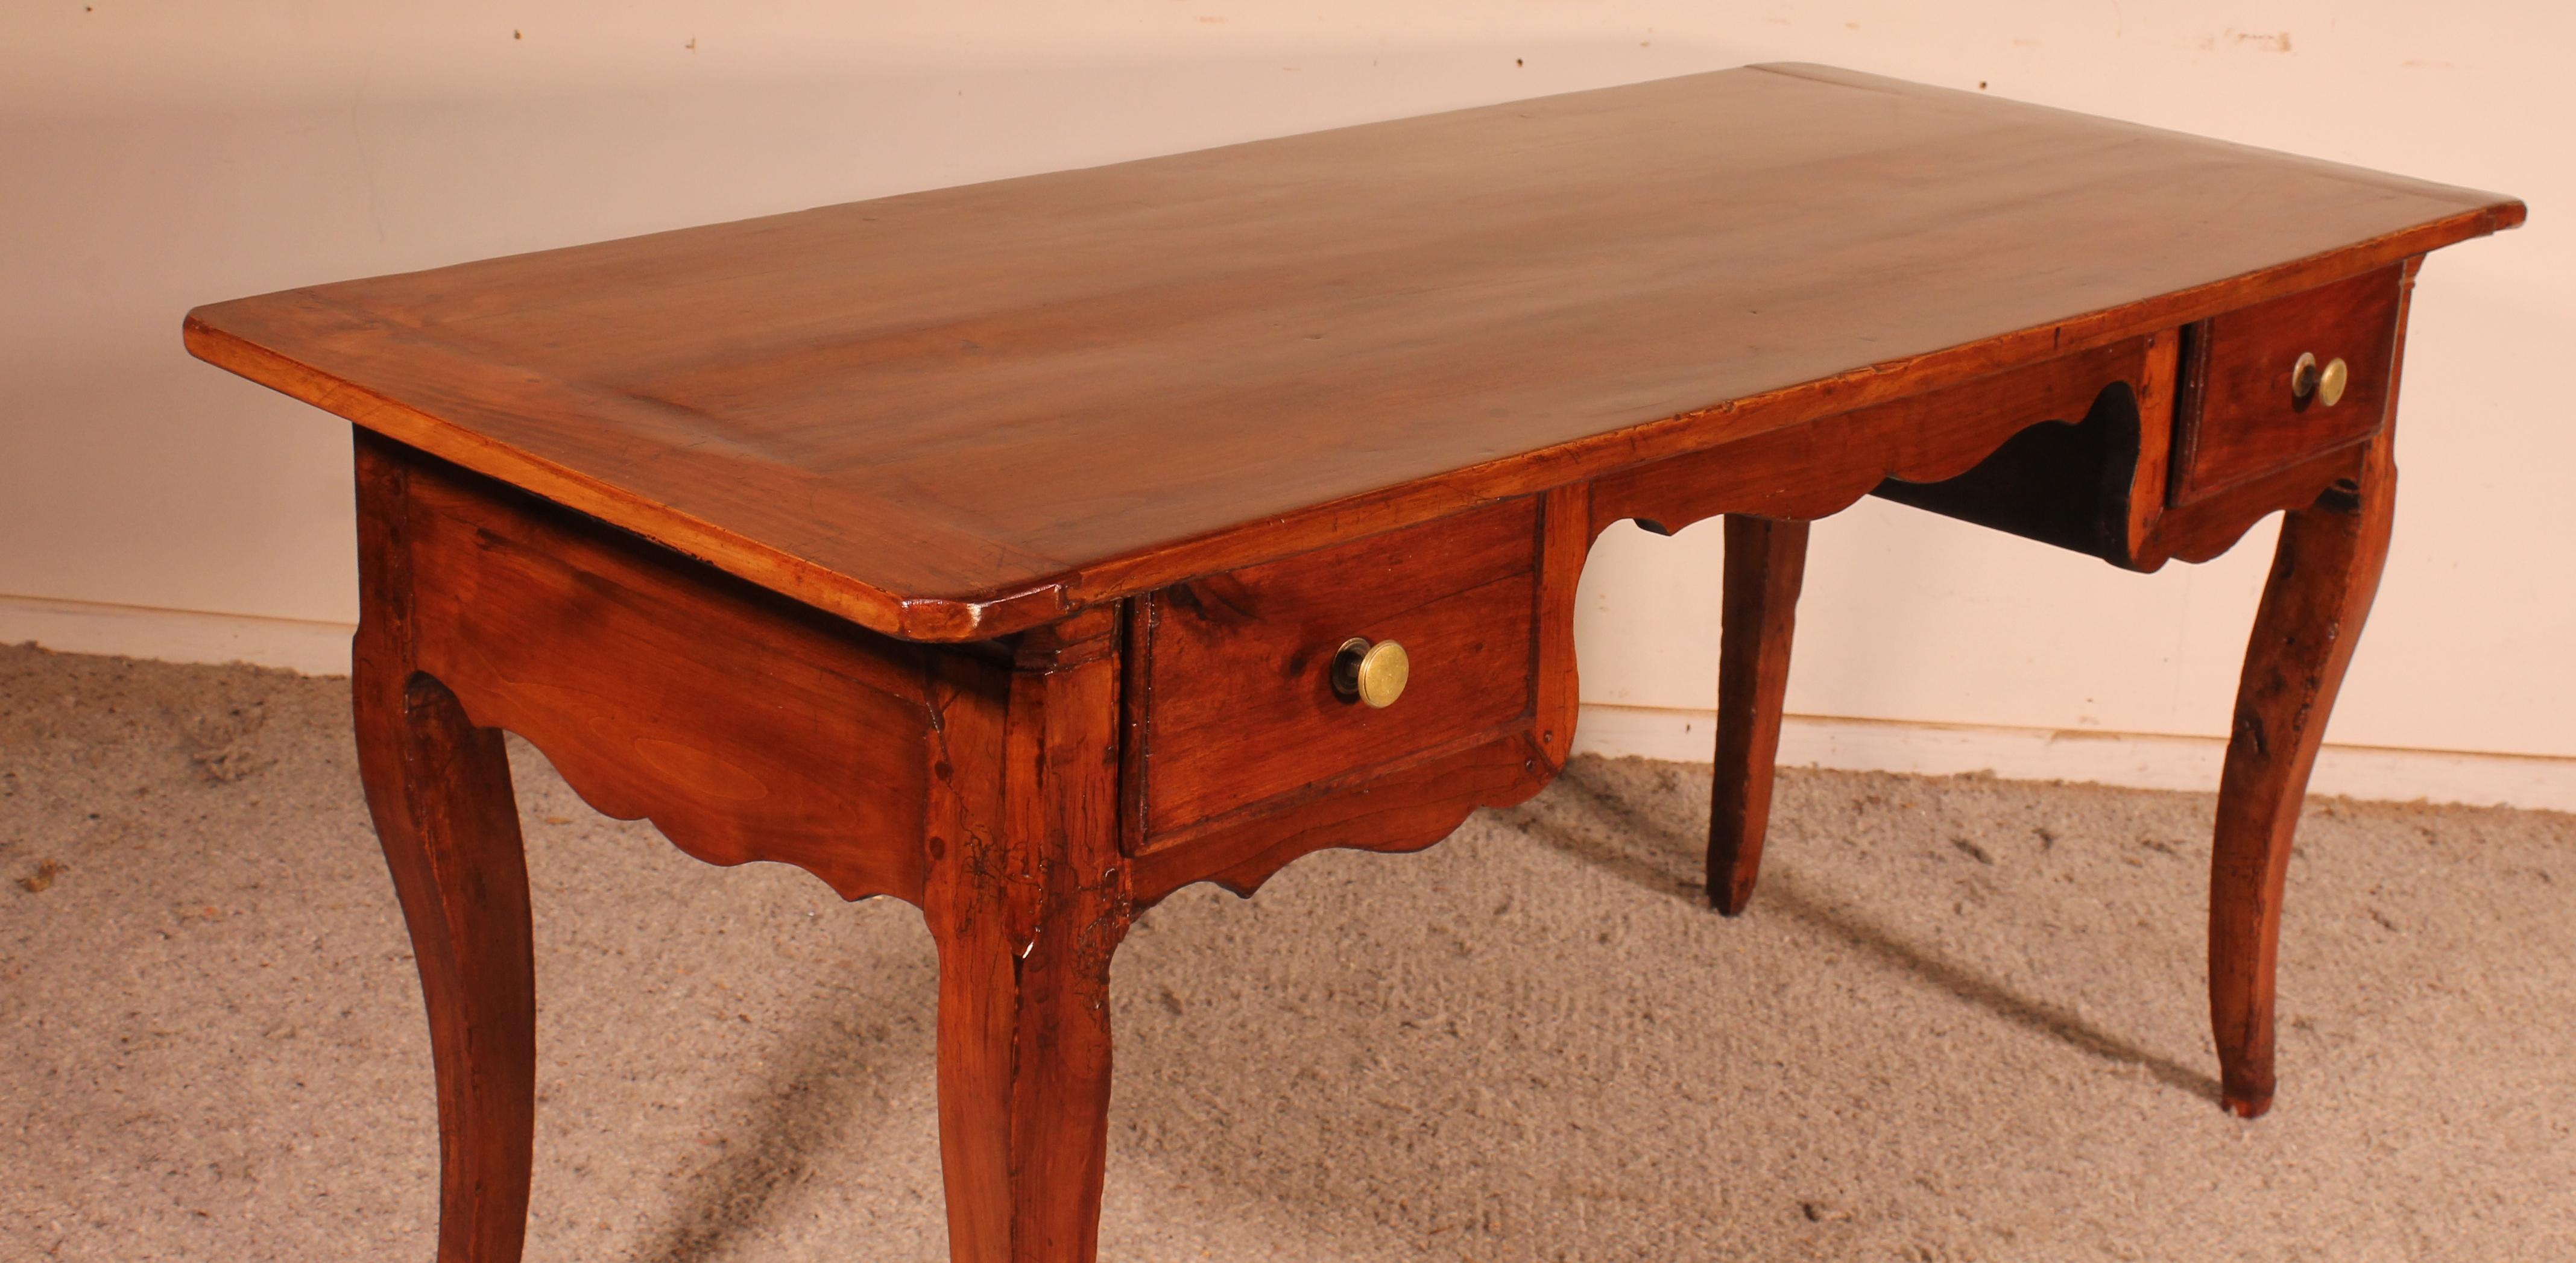 Louis XV Desk in Cherry Early 19th Century For Sale 6